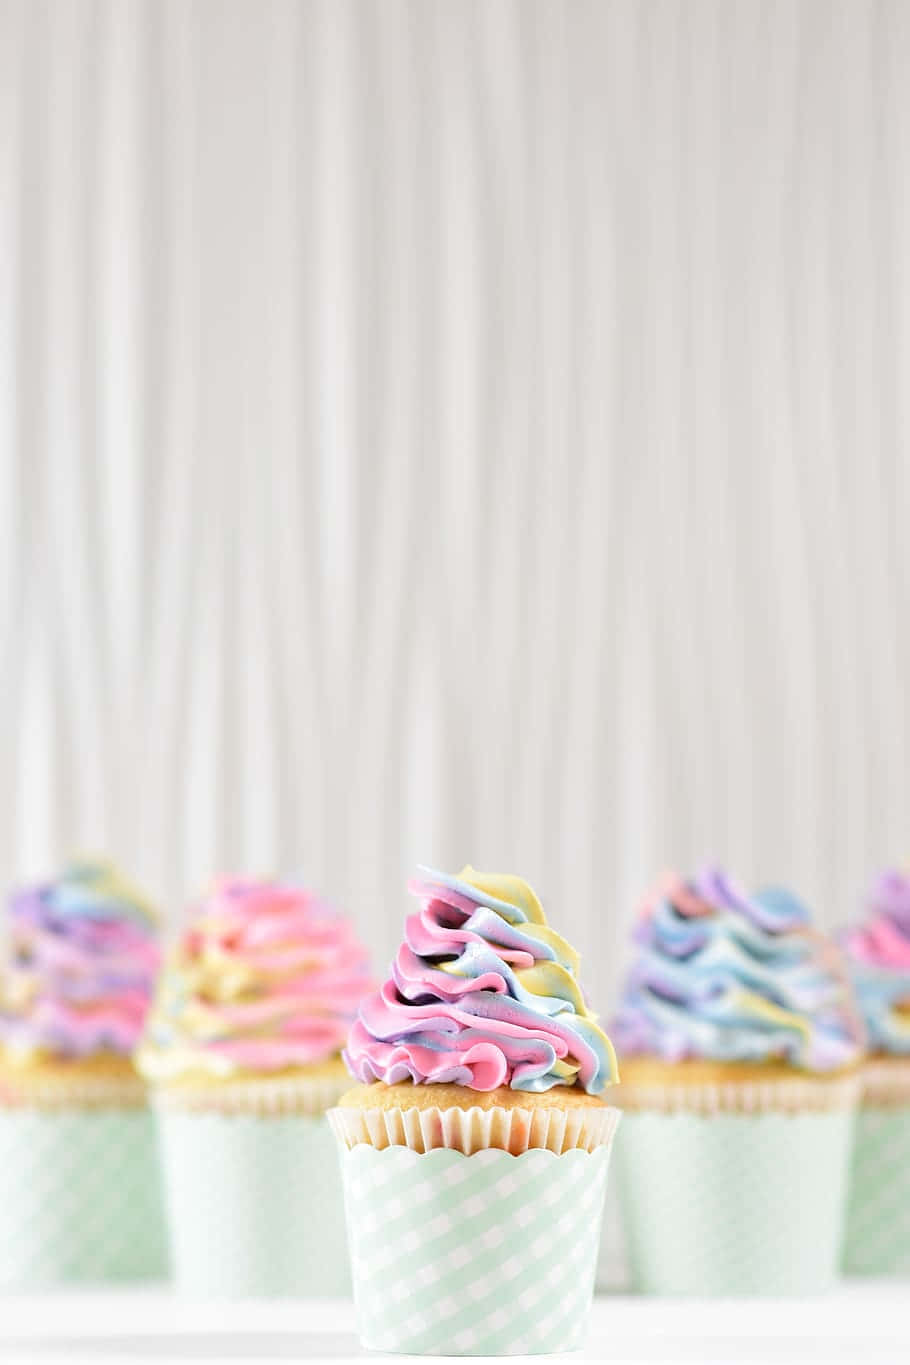 A Group Of Cupcakes With Colorful Frosting Wallpaper